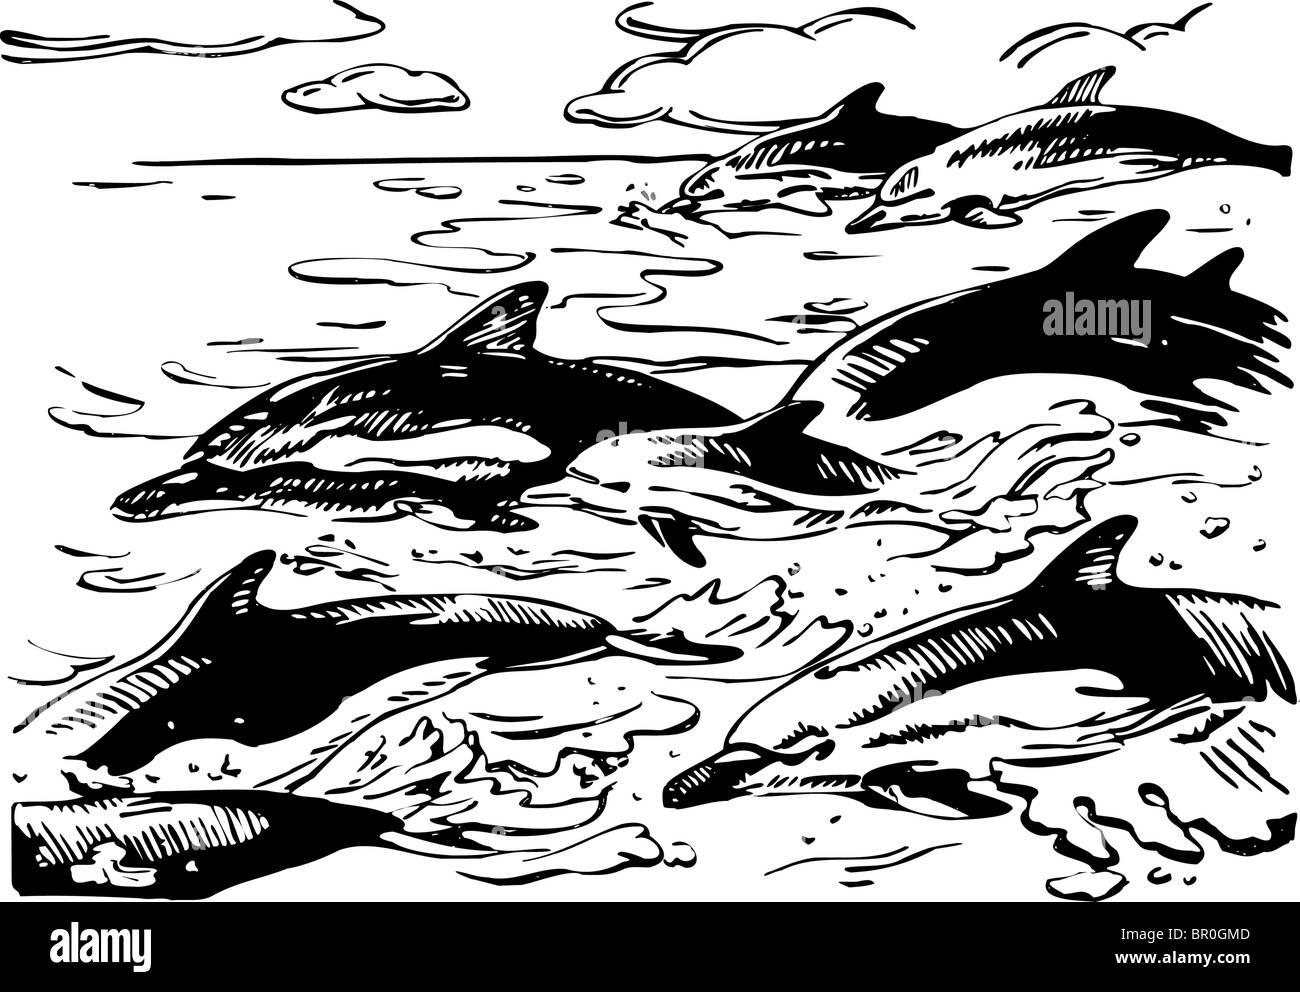 A group of dolphins swimming in the ocean illustraed in black and white Stock Photo